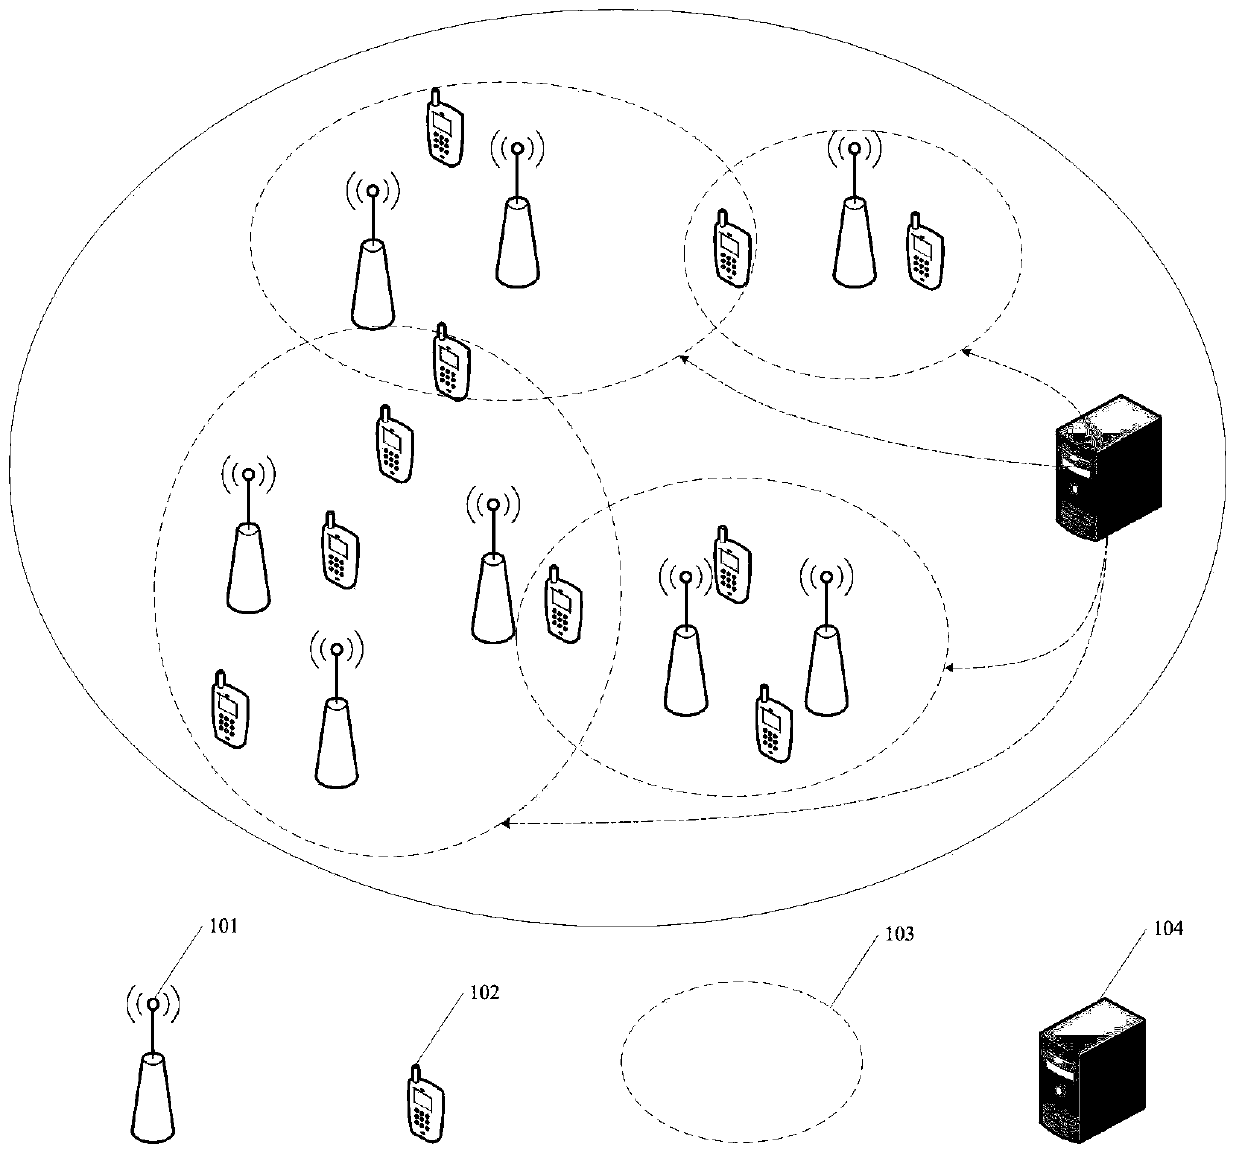 Semi-dynamic overlapping clustering algorithm for densely distributed wireless communication system